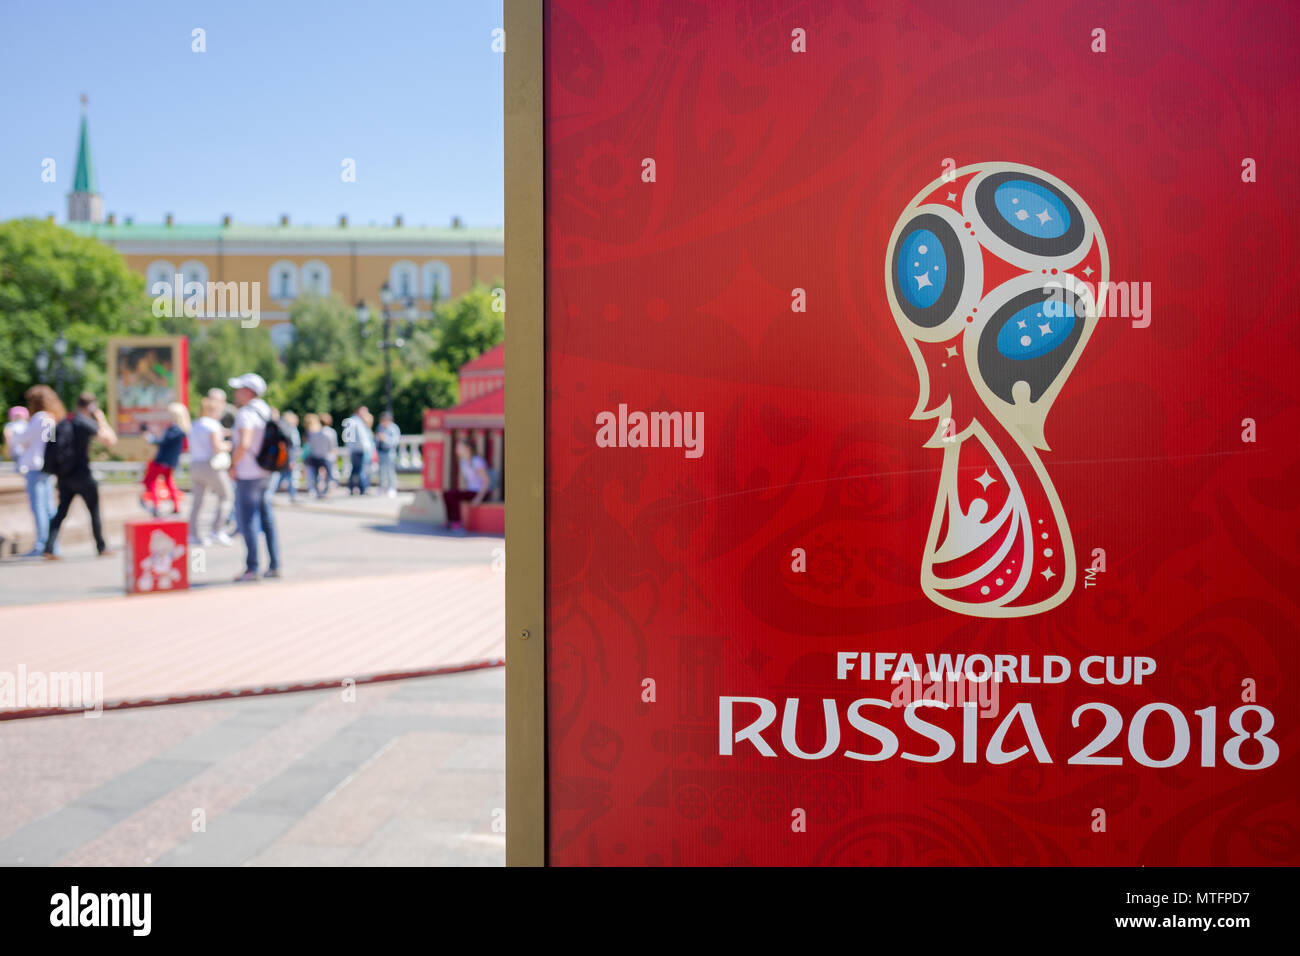 MOSCOW, RUSSIA - MAY 26, 2018: Official logo FIFA World Cup 2018 in Russia printed on a red background canvas, at Manezh Square. Walking people, Kreml Stock Photo